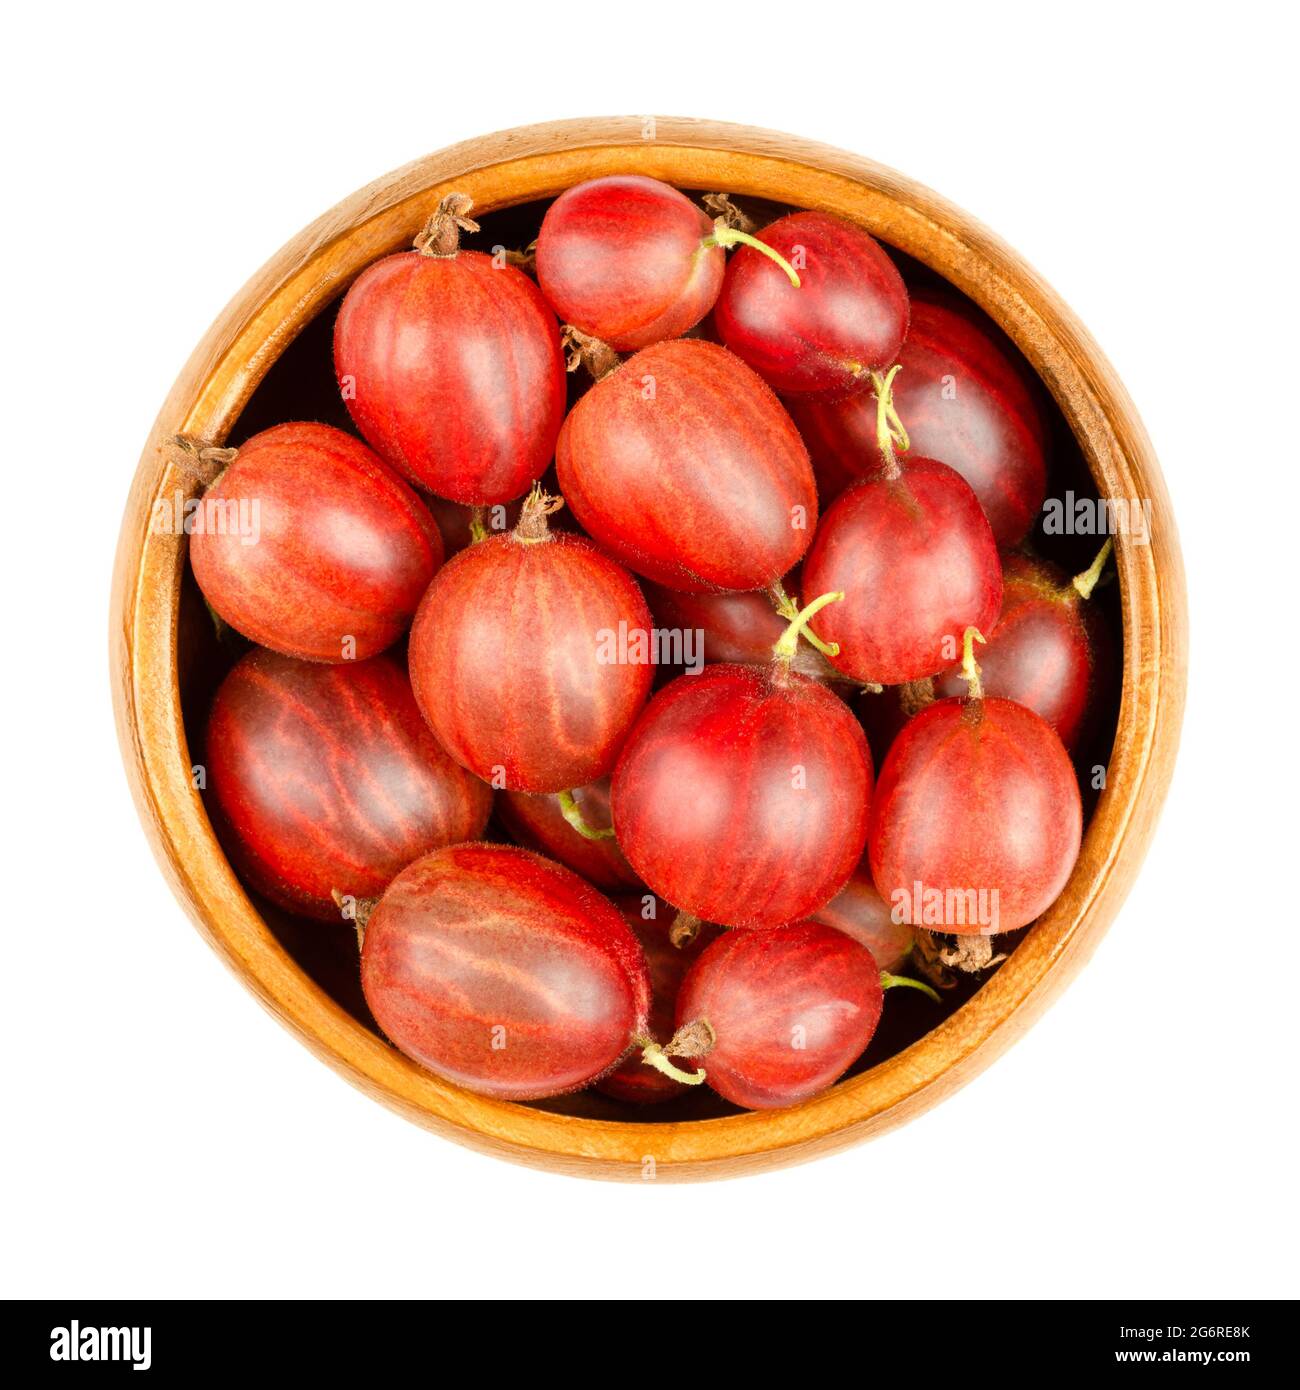 Red gooseberries in a wooden bowl. Fresh and ripe berries, fruits of Ribes uva-crispa, also known as European gooseberry, with sourish sweet taste. Stock Photo